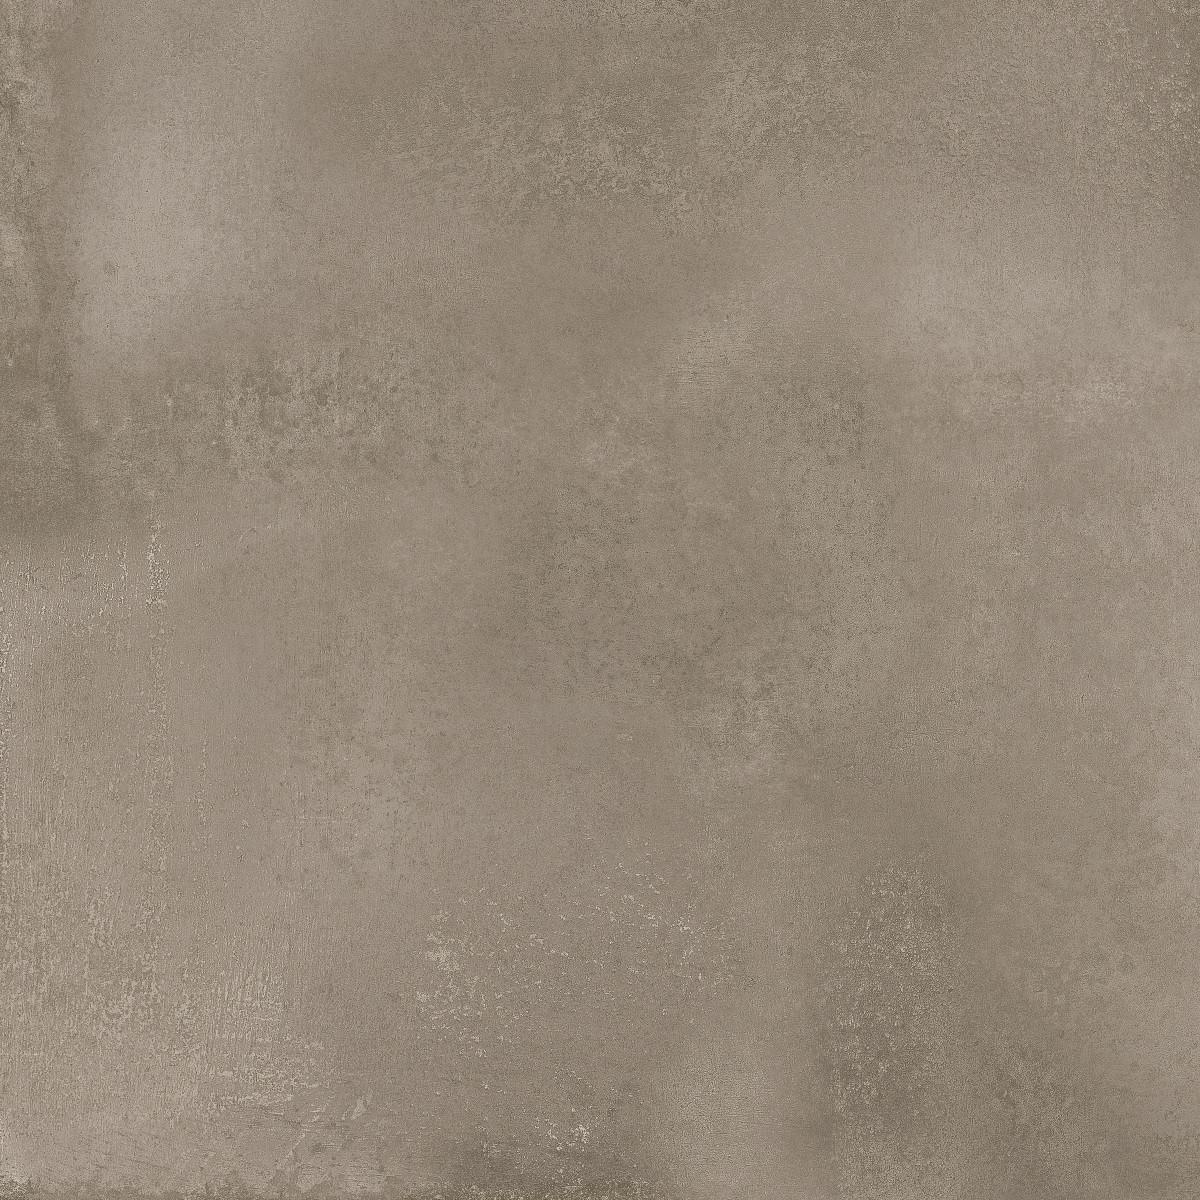 CEMENT GREY RECT. 60X60 - 1.44 m² - 4